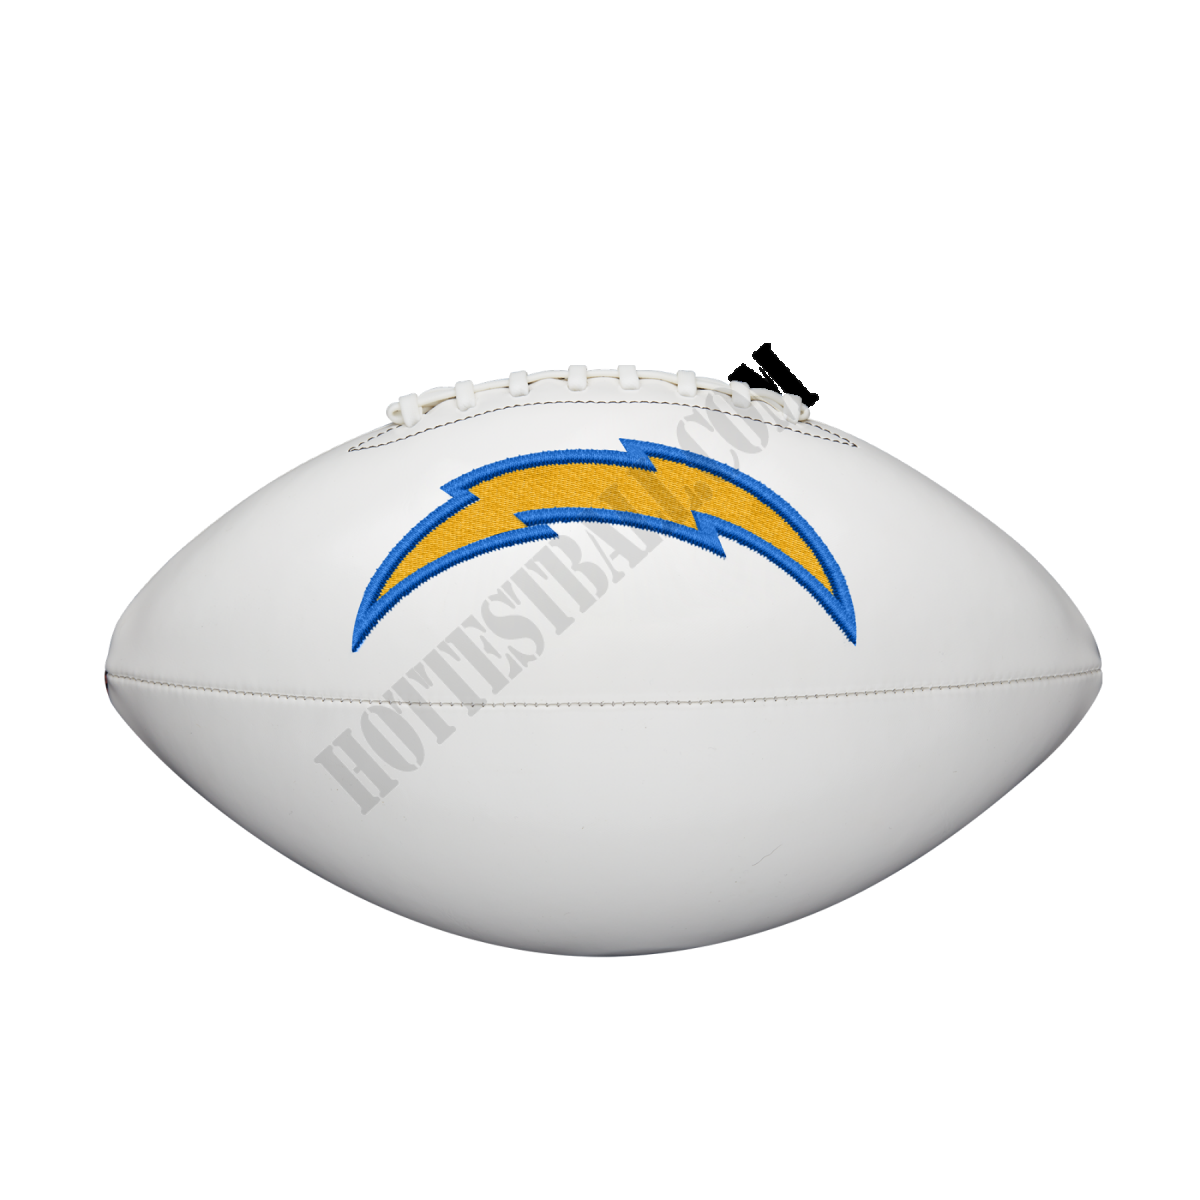 NFL Live Signature Autograph Football - Los Angeles Chargers - Wilson Discount Store - -4